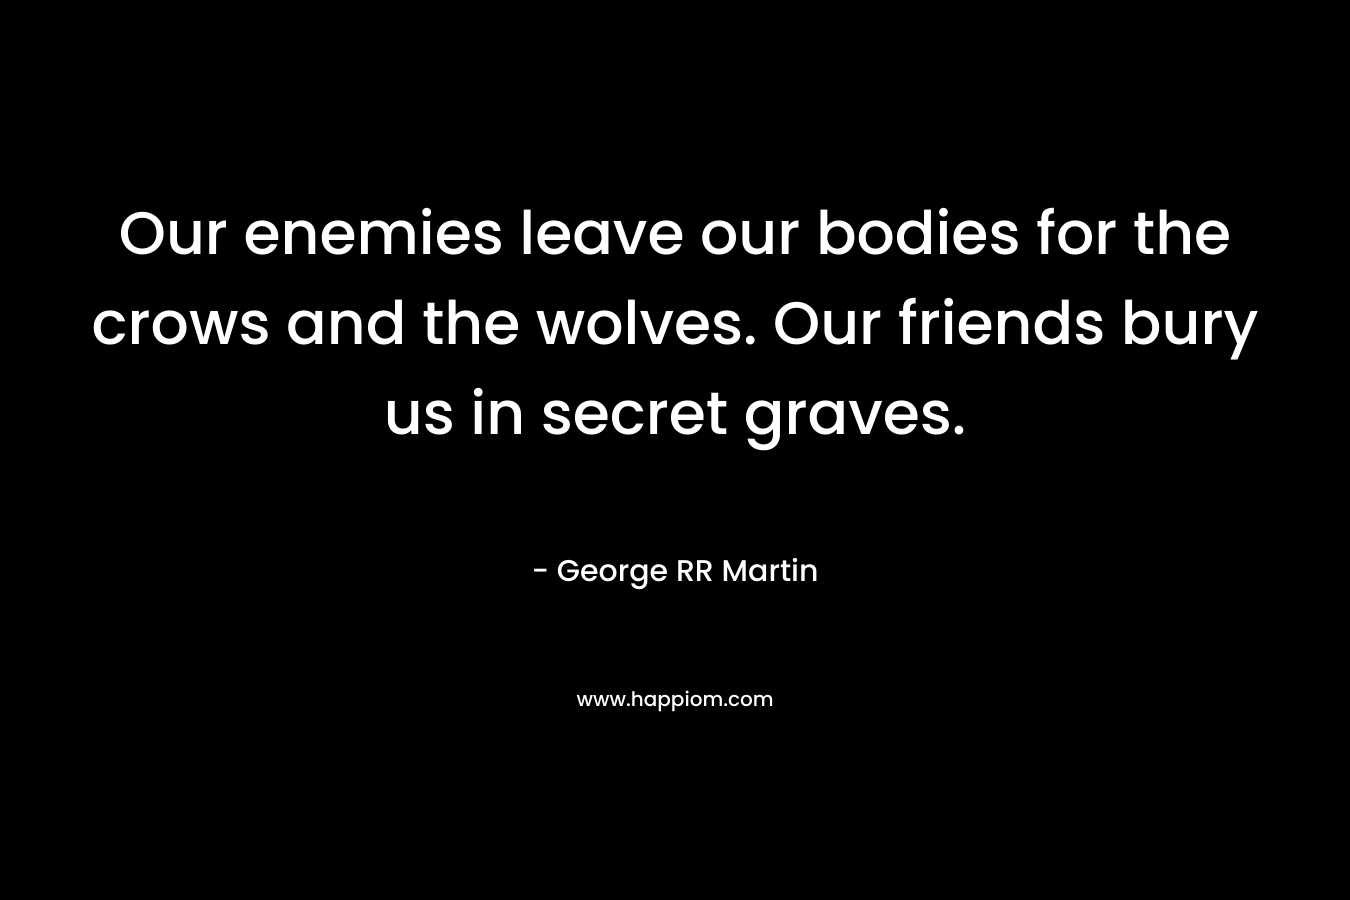 Our enemies leave our bodies for the crows and the wolves. Our friends bury us in secret graves. – George RR Martin